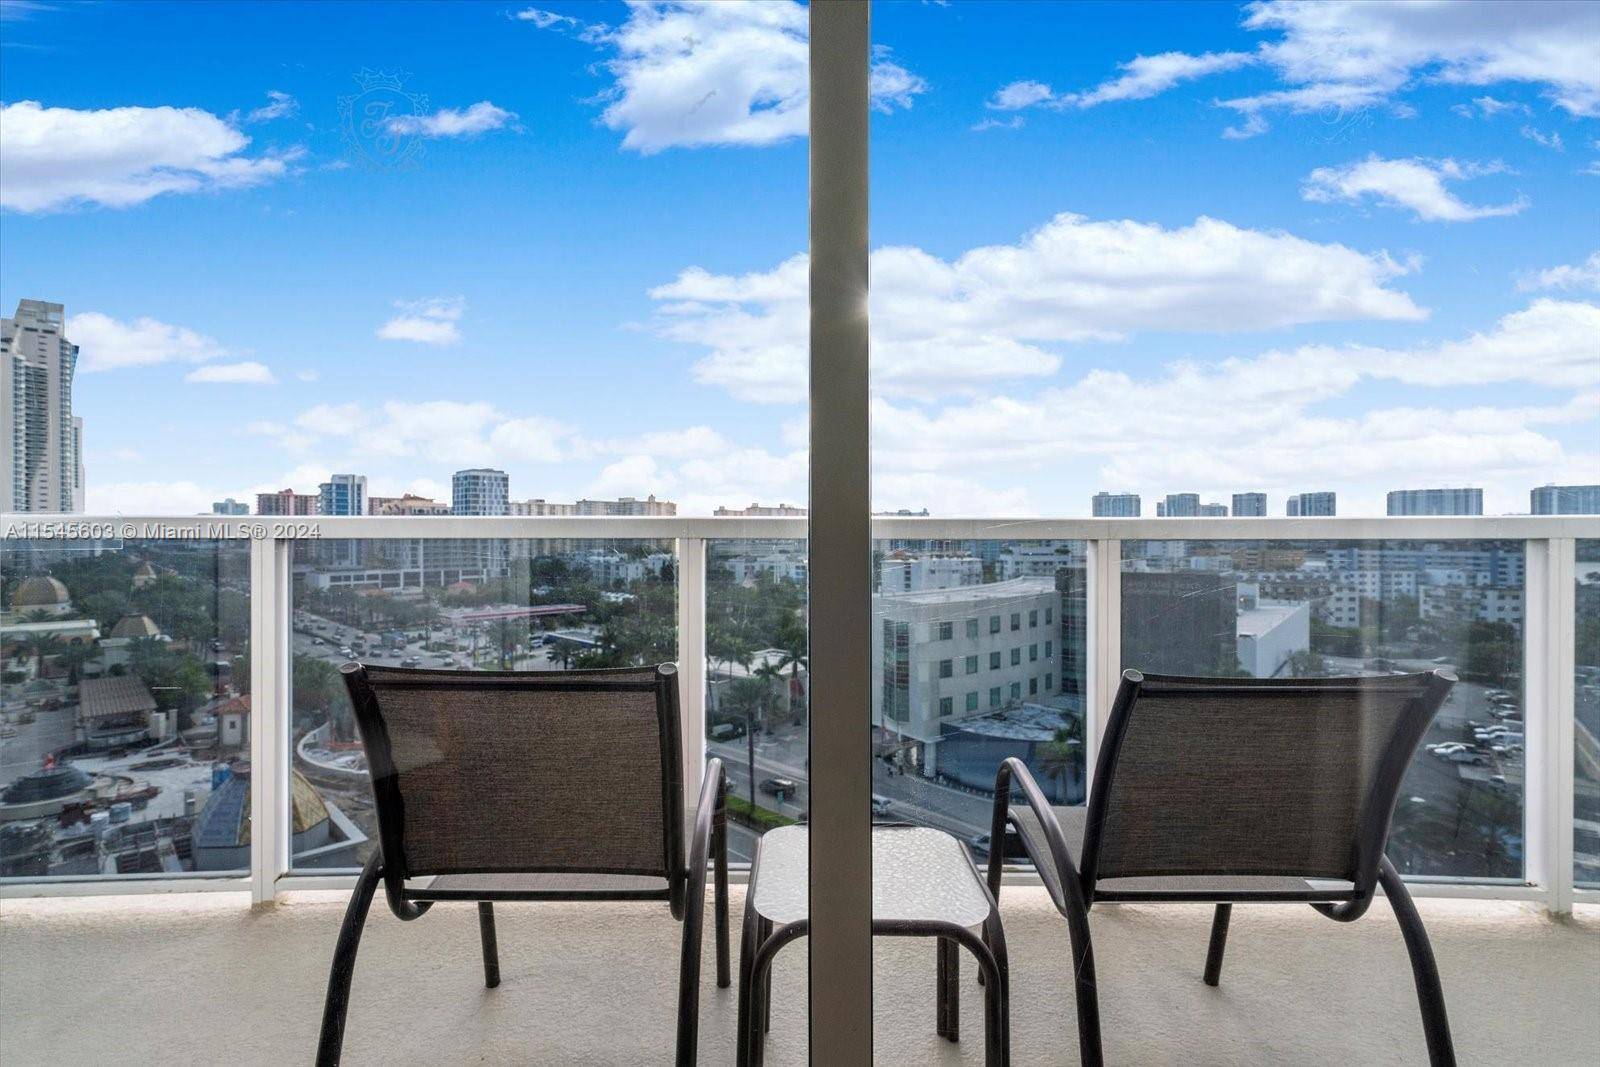 Studio in Condo hotel, beautiful Collins and City view, 1 King, Washer and Dryer, dining table, kitchenette, fully furnished by hotel standards.